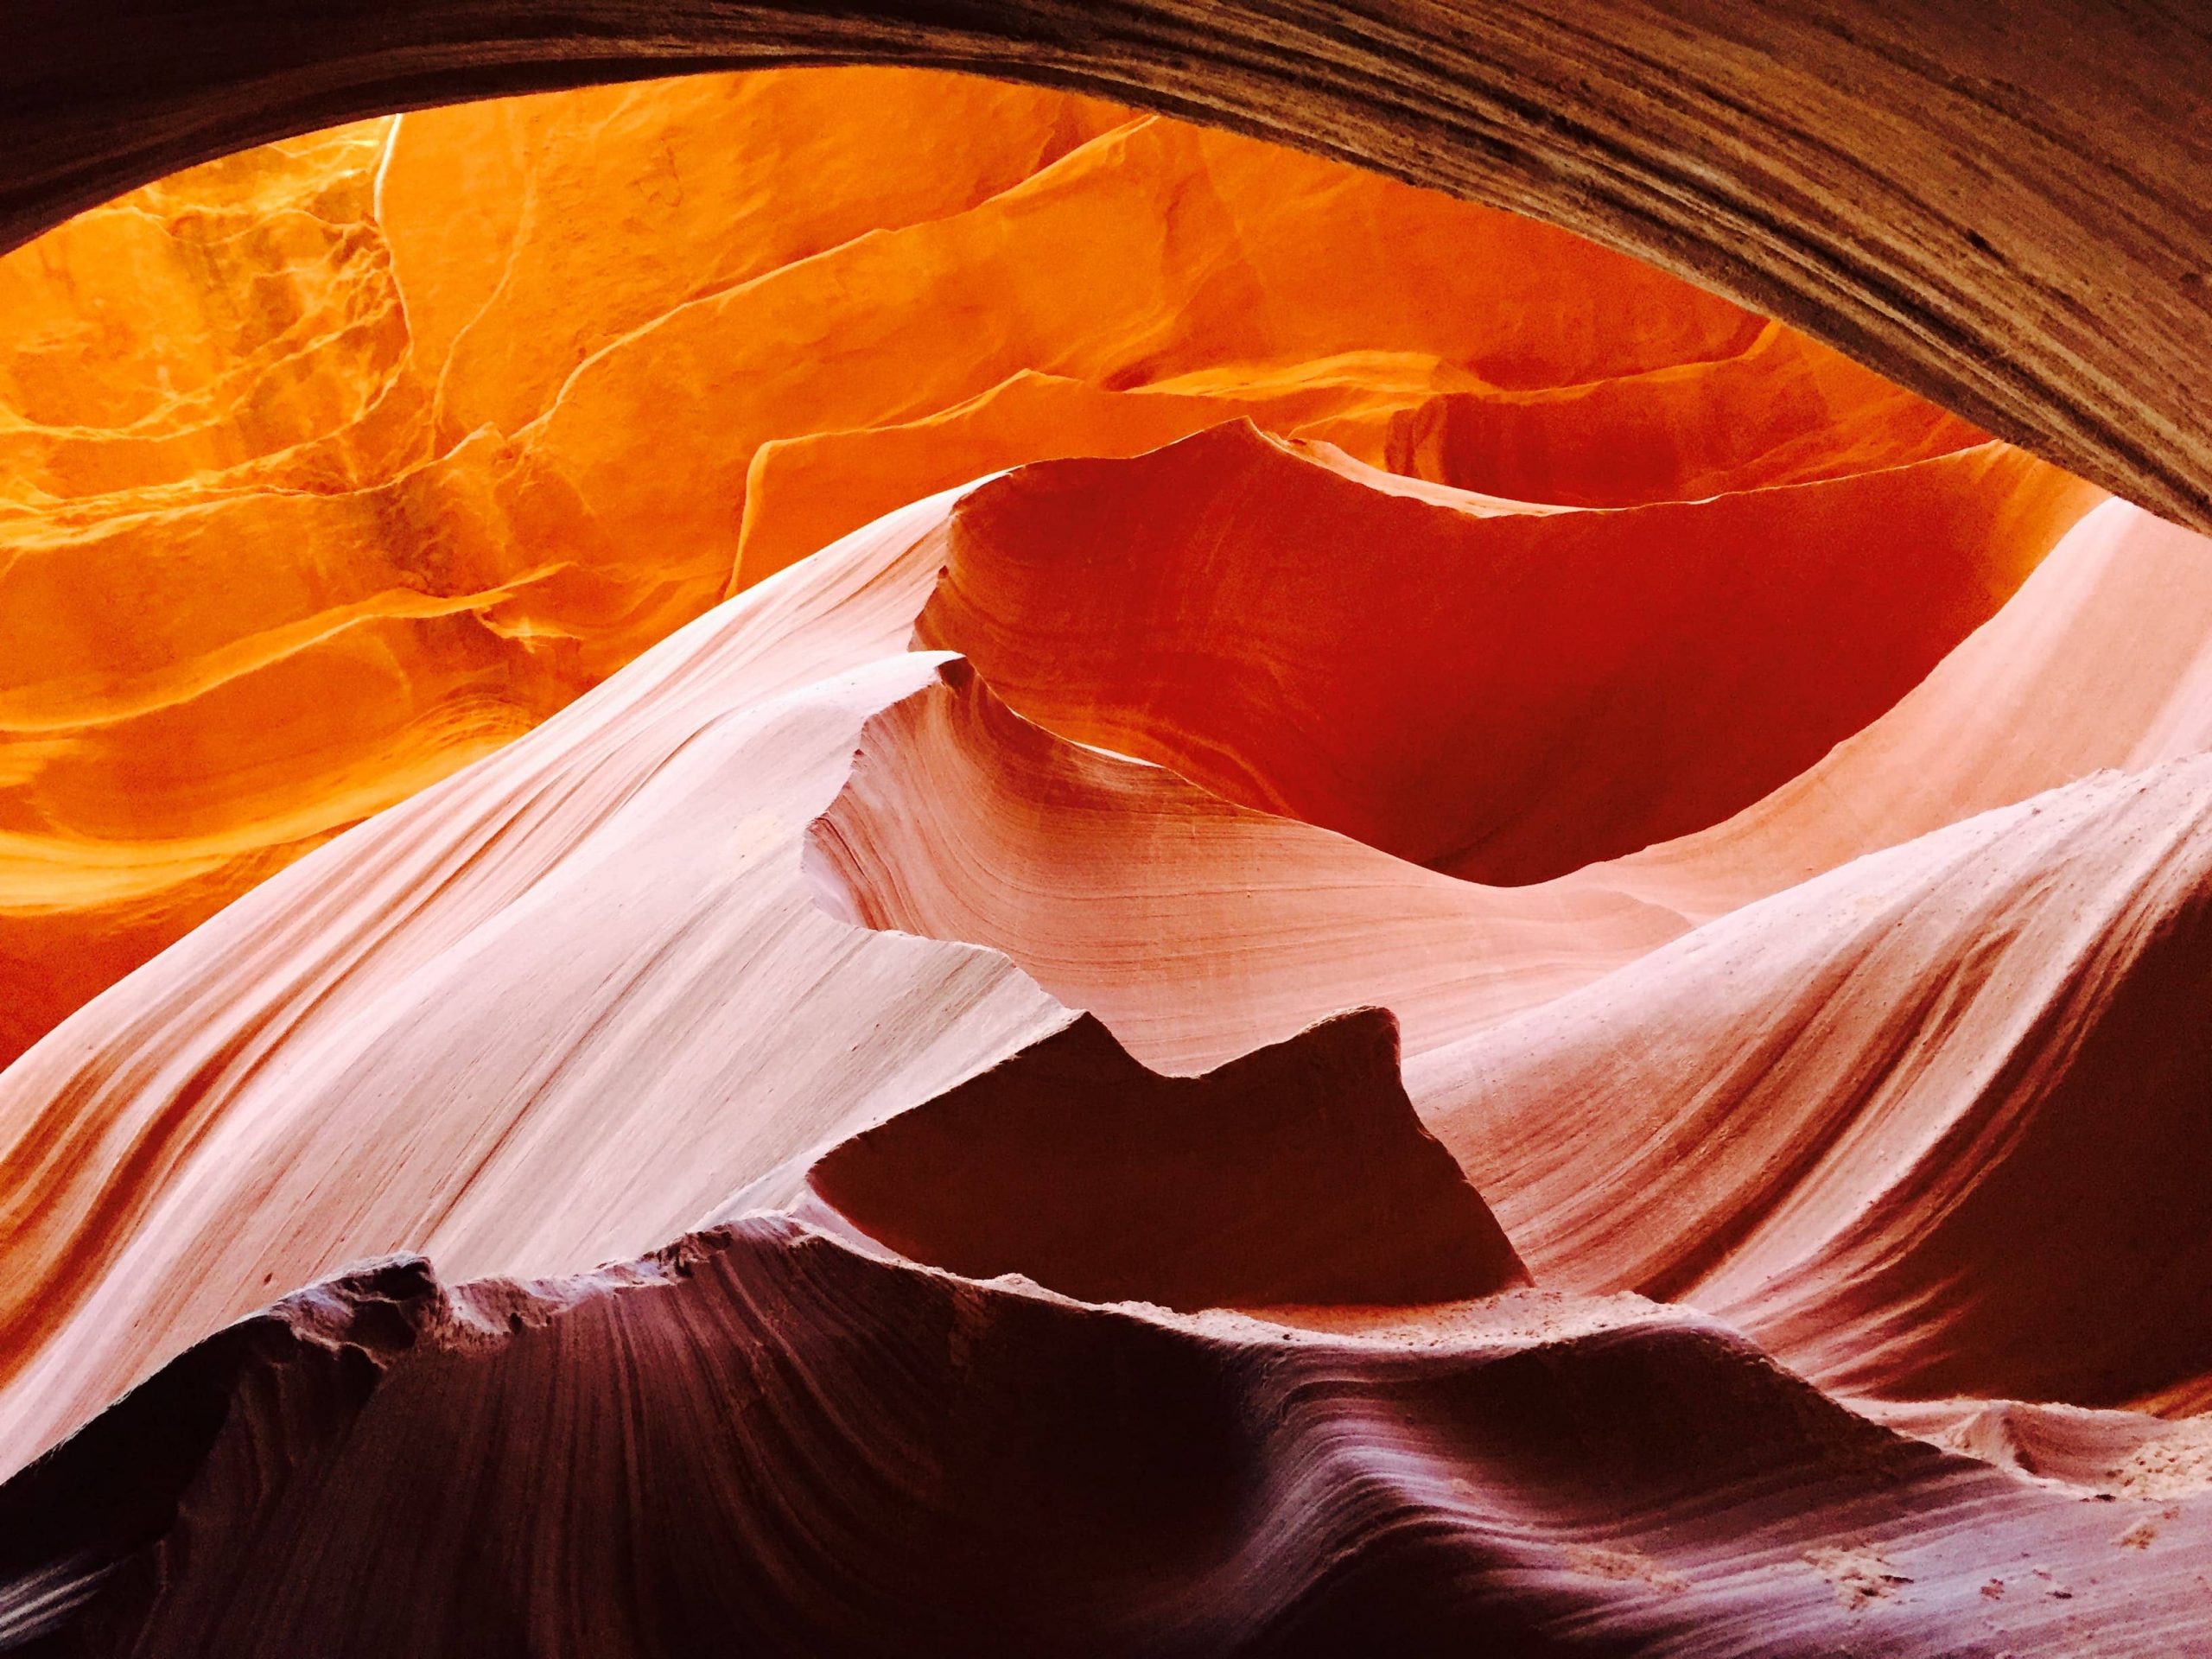 Catching the many colors of Antelope Canyon